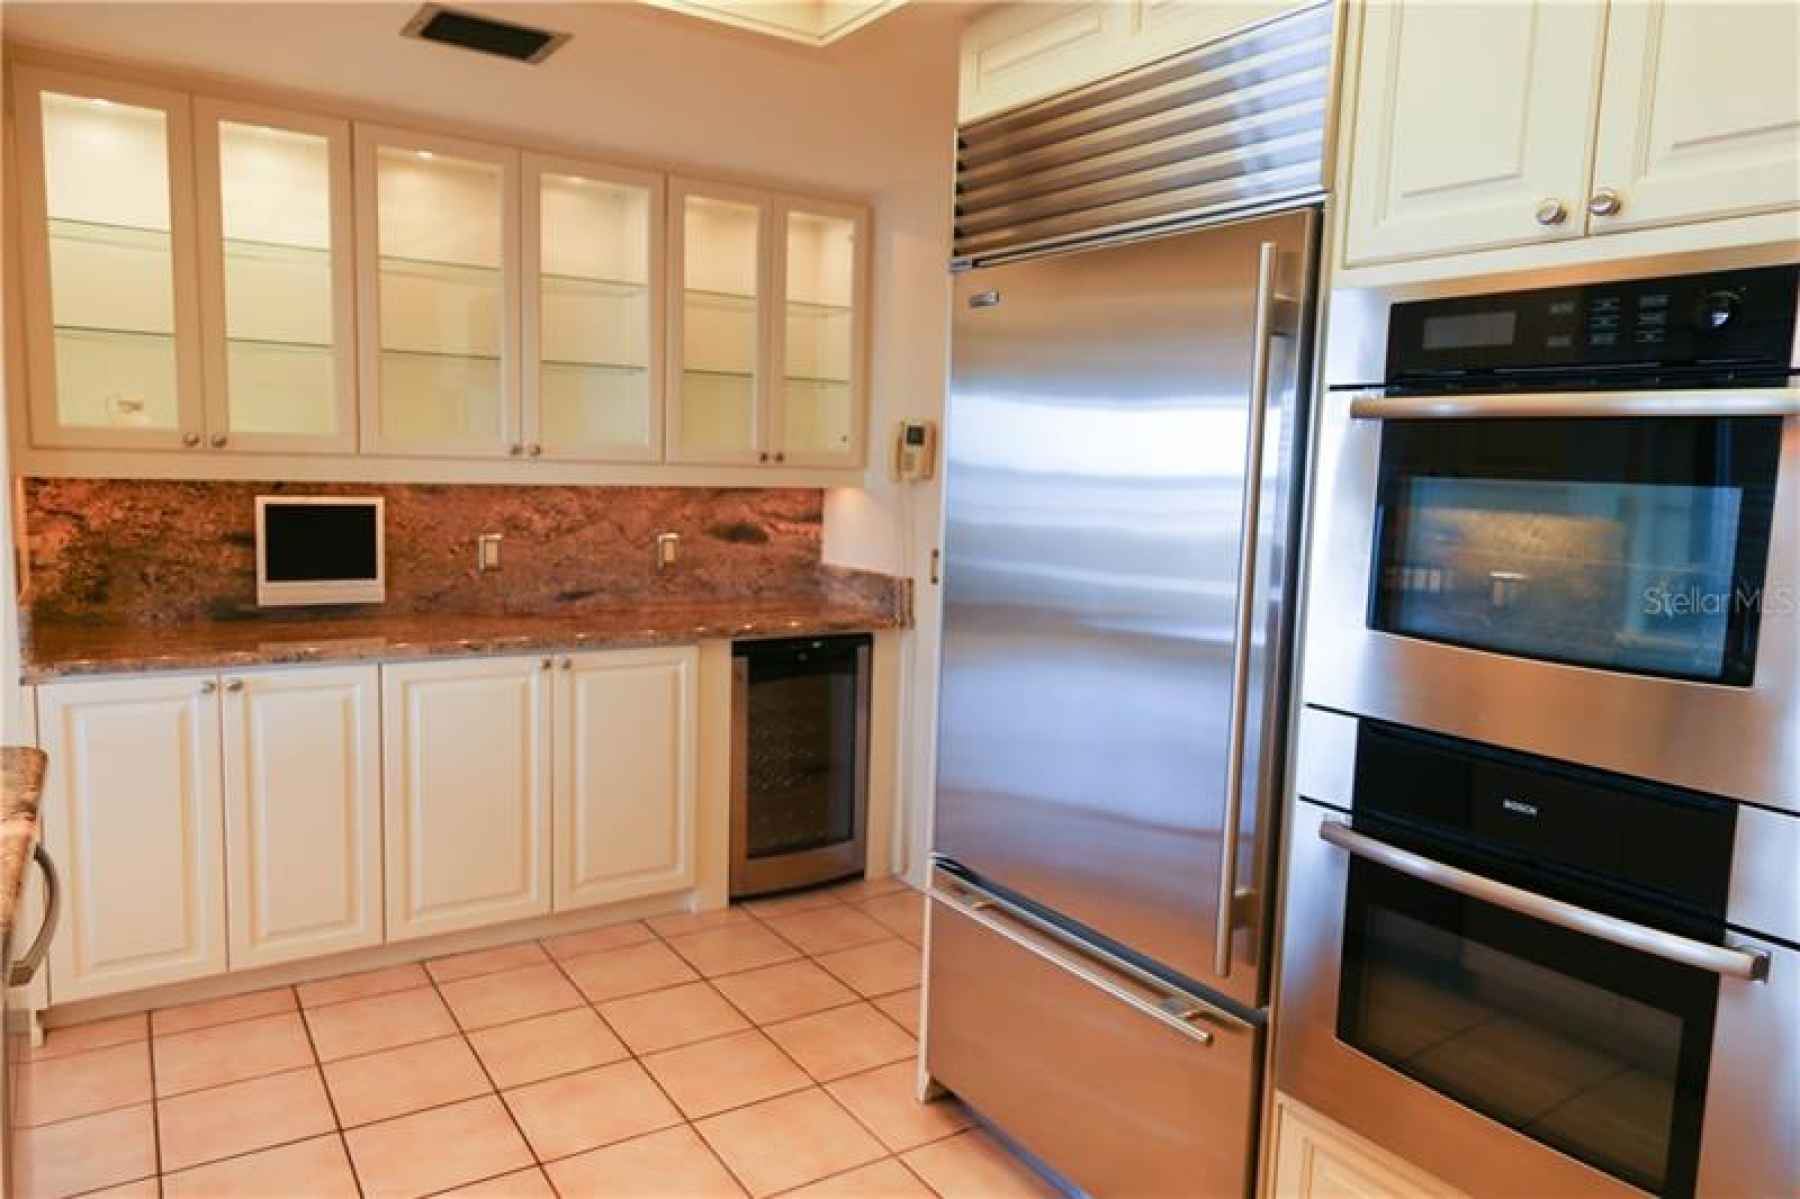 Kitchen with additional counter space and cabinetry and with Sub-Zero fridge and double ovens.